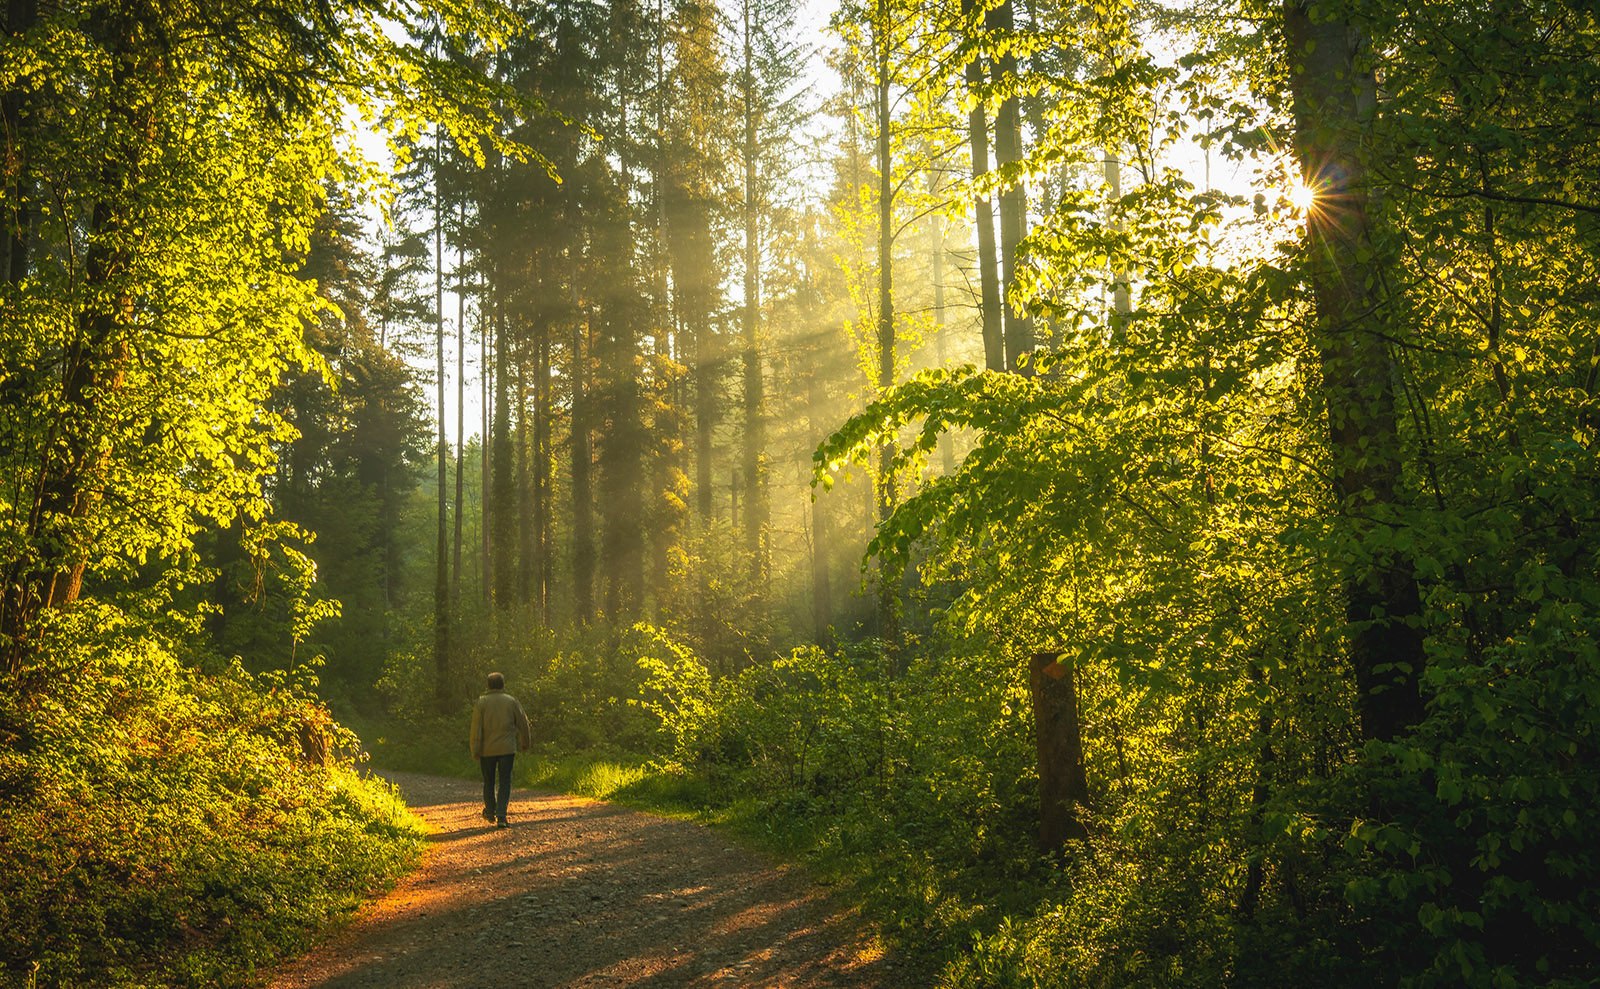 12 Great Books Set in the Forest That We Love